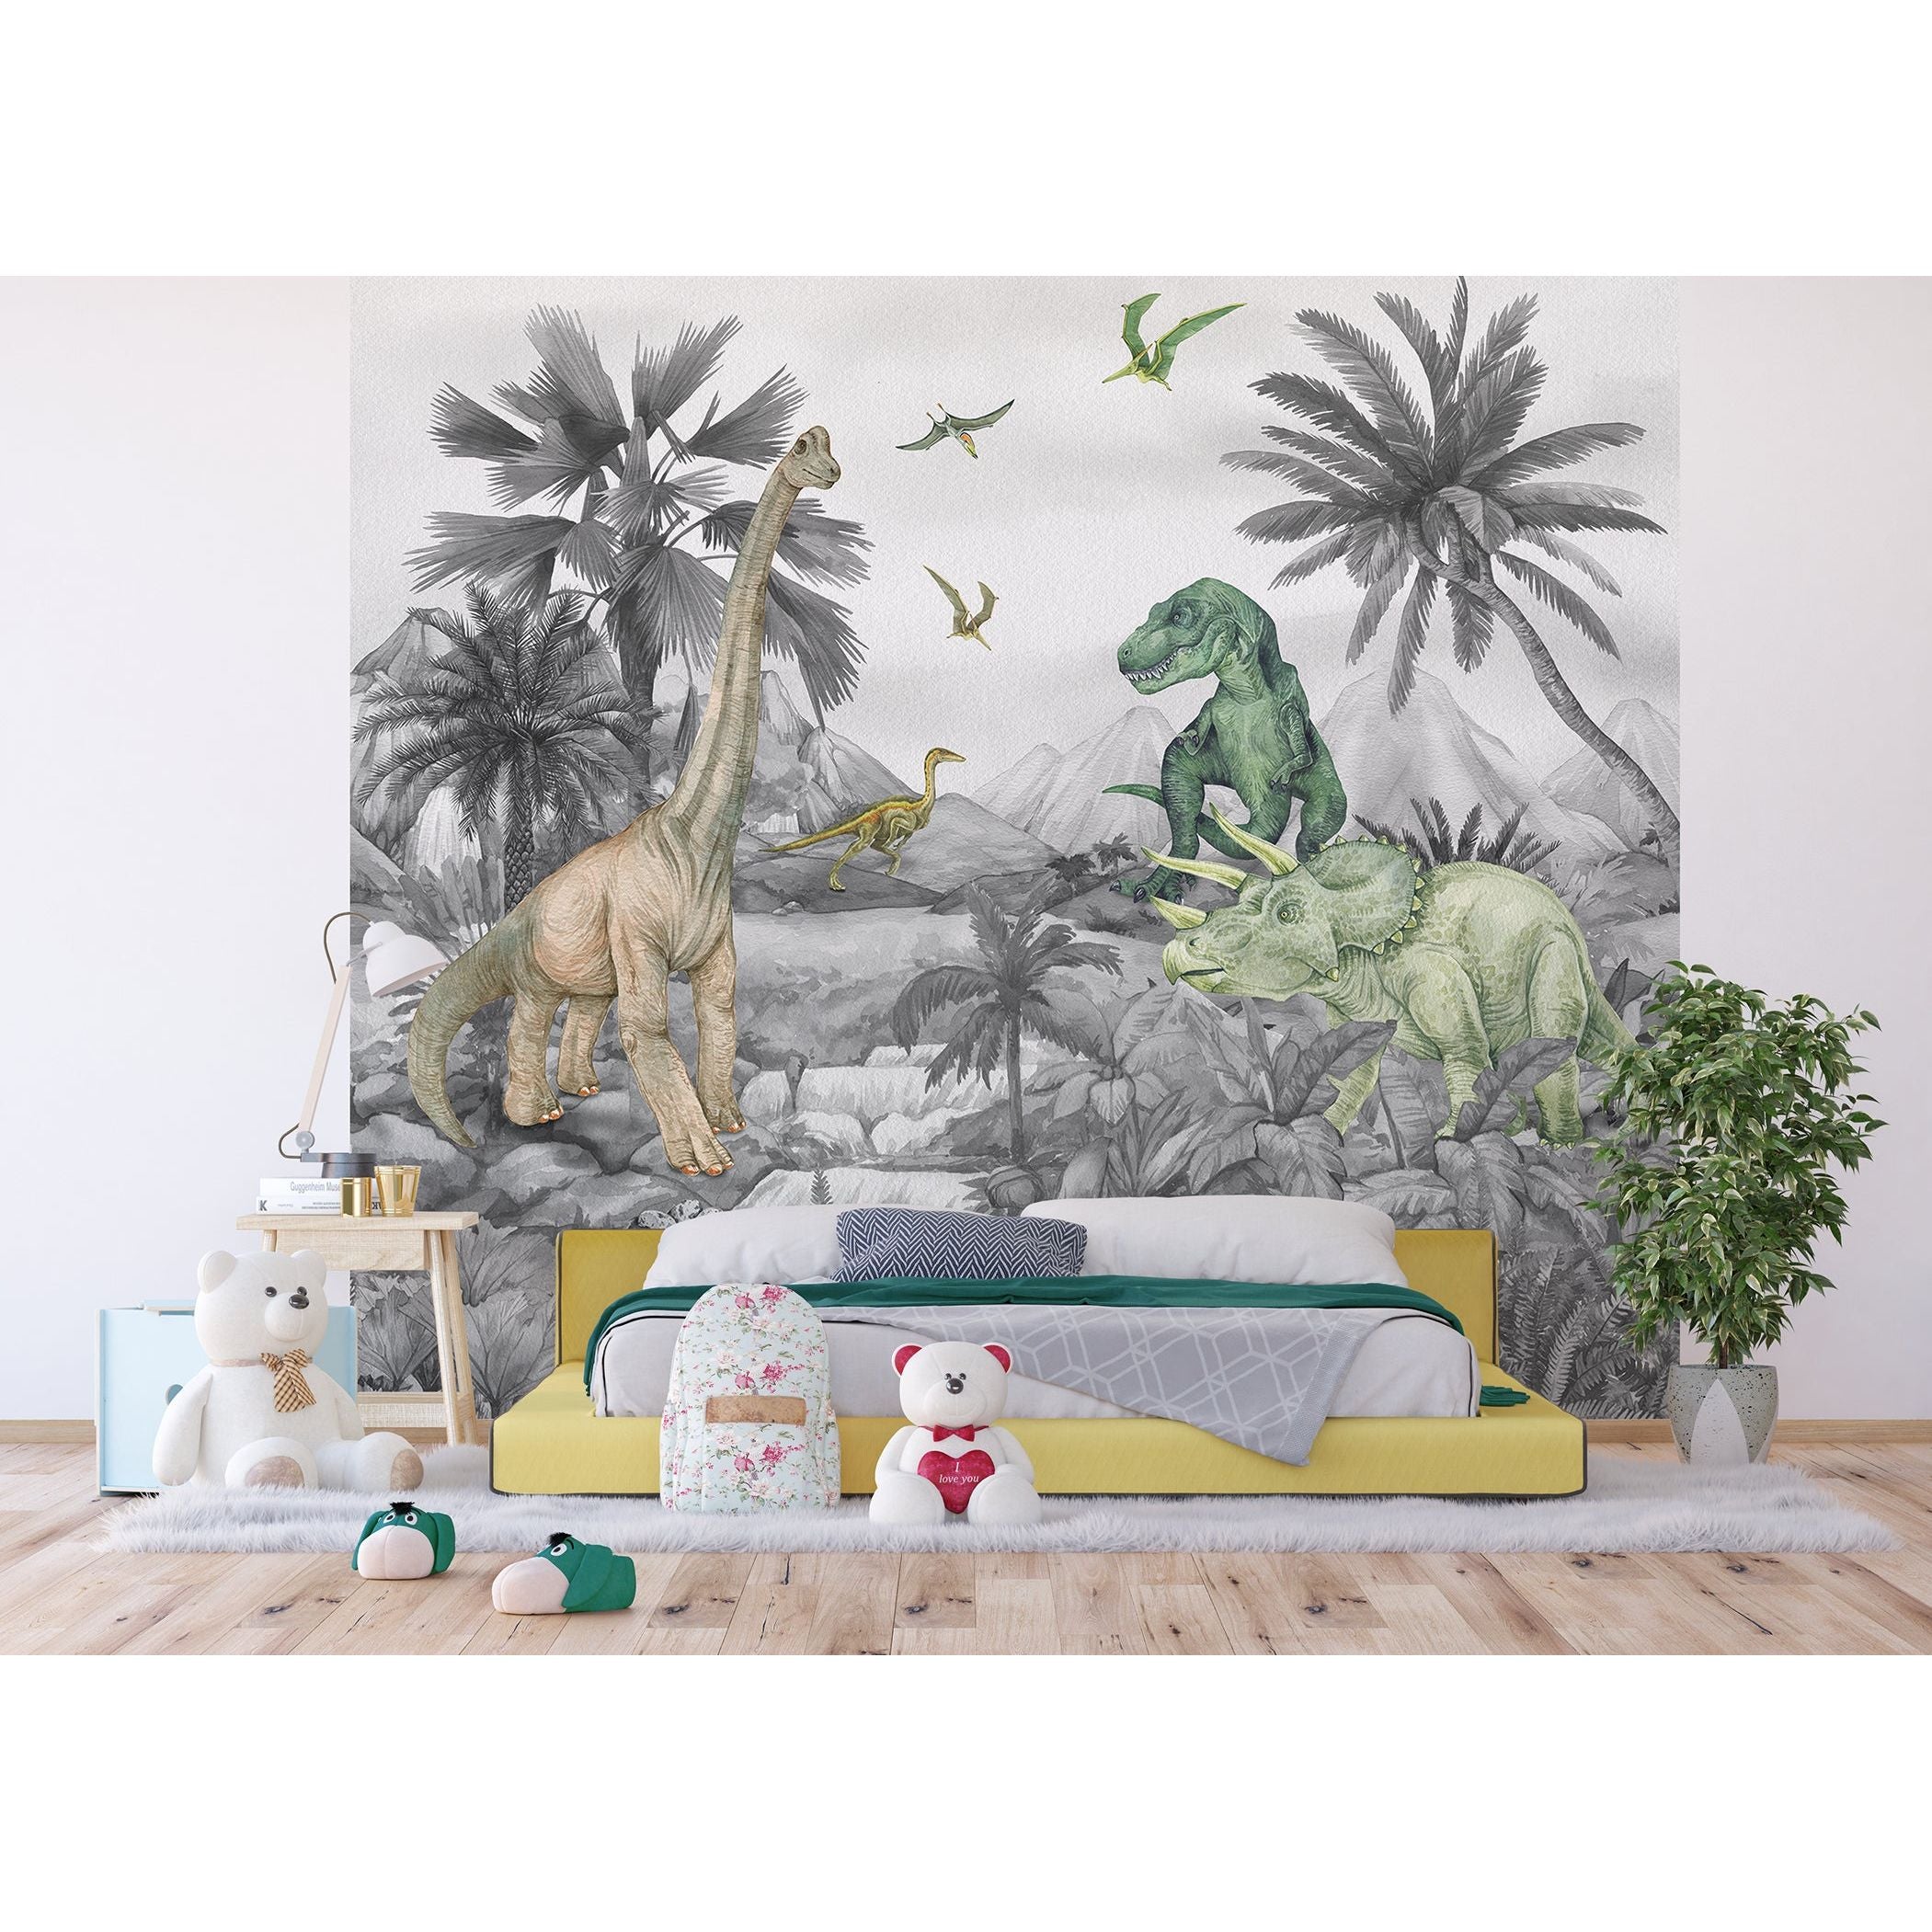 Dinosaur Wall Murals: Transform Your Space with Prehistoric Majesty